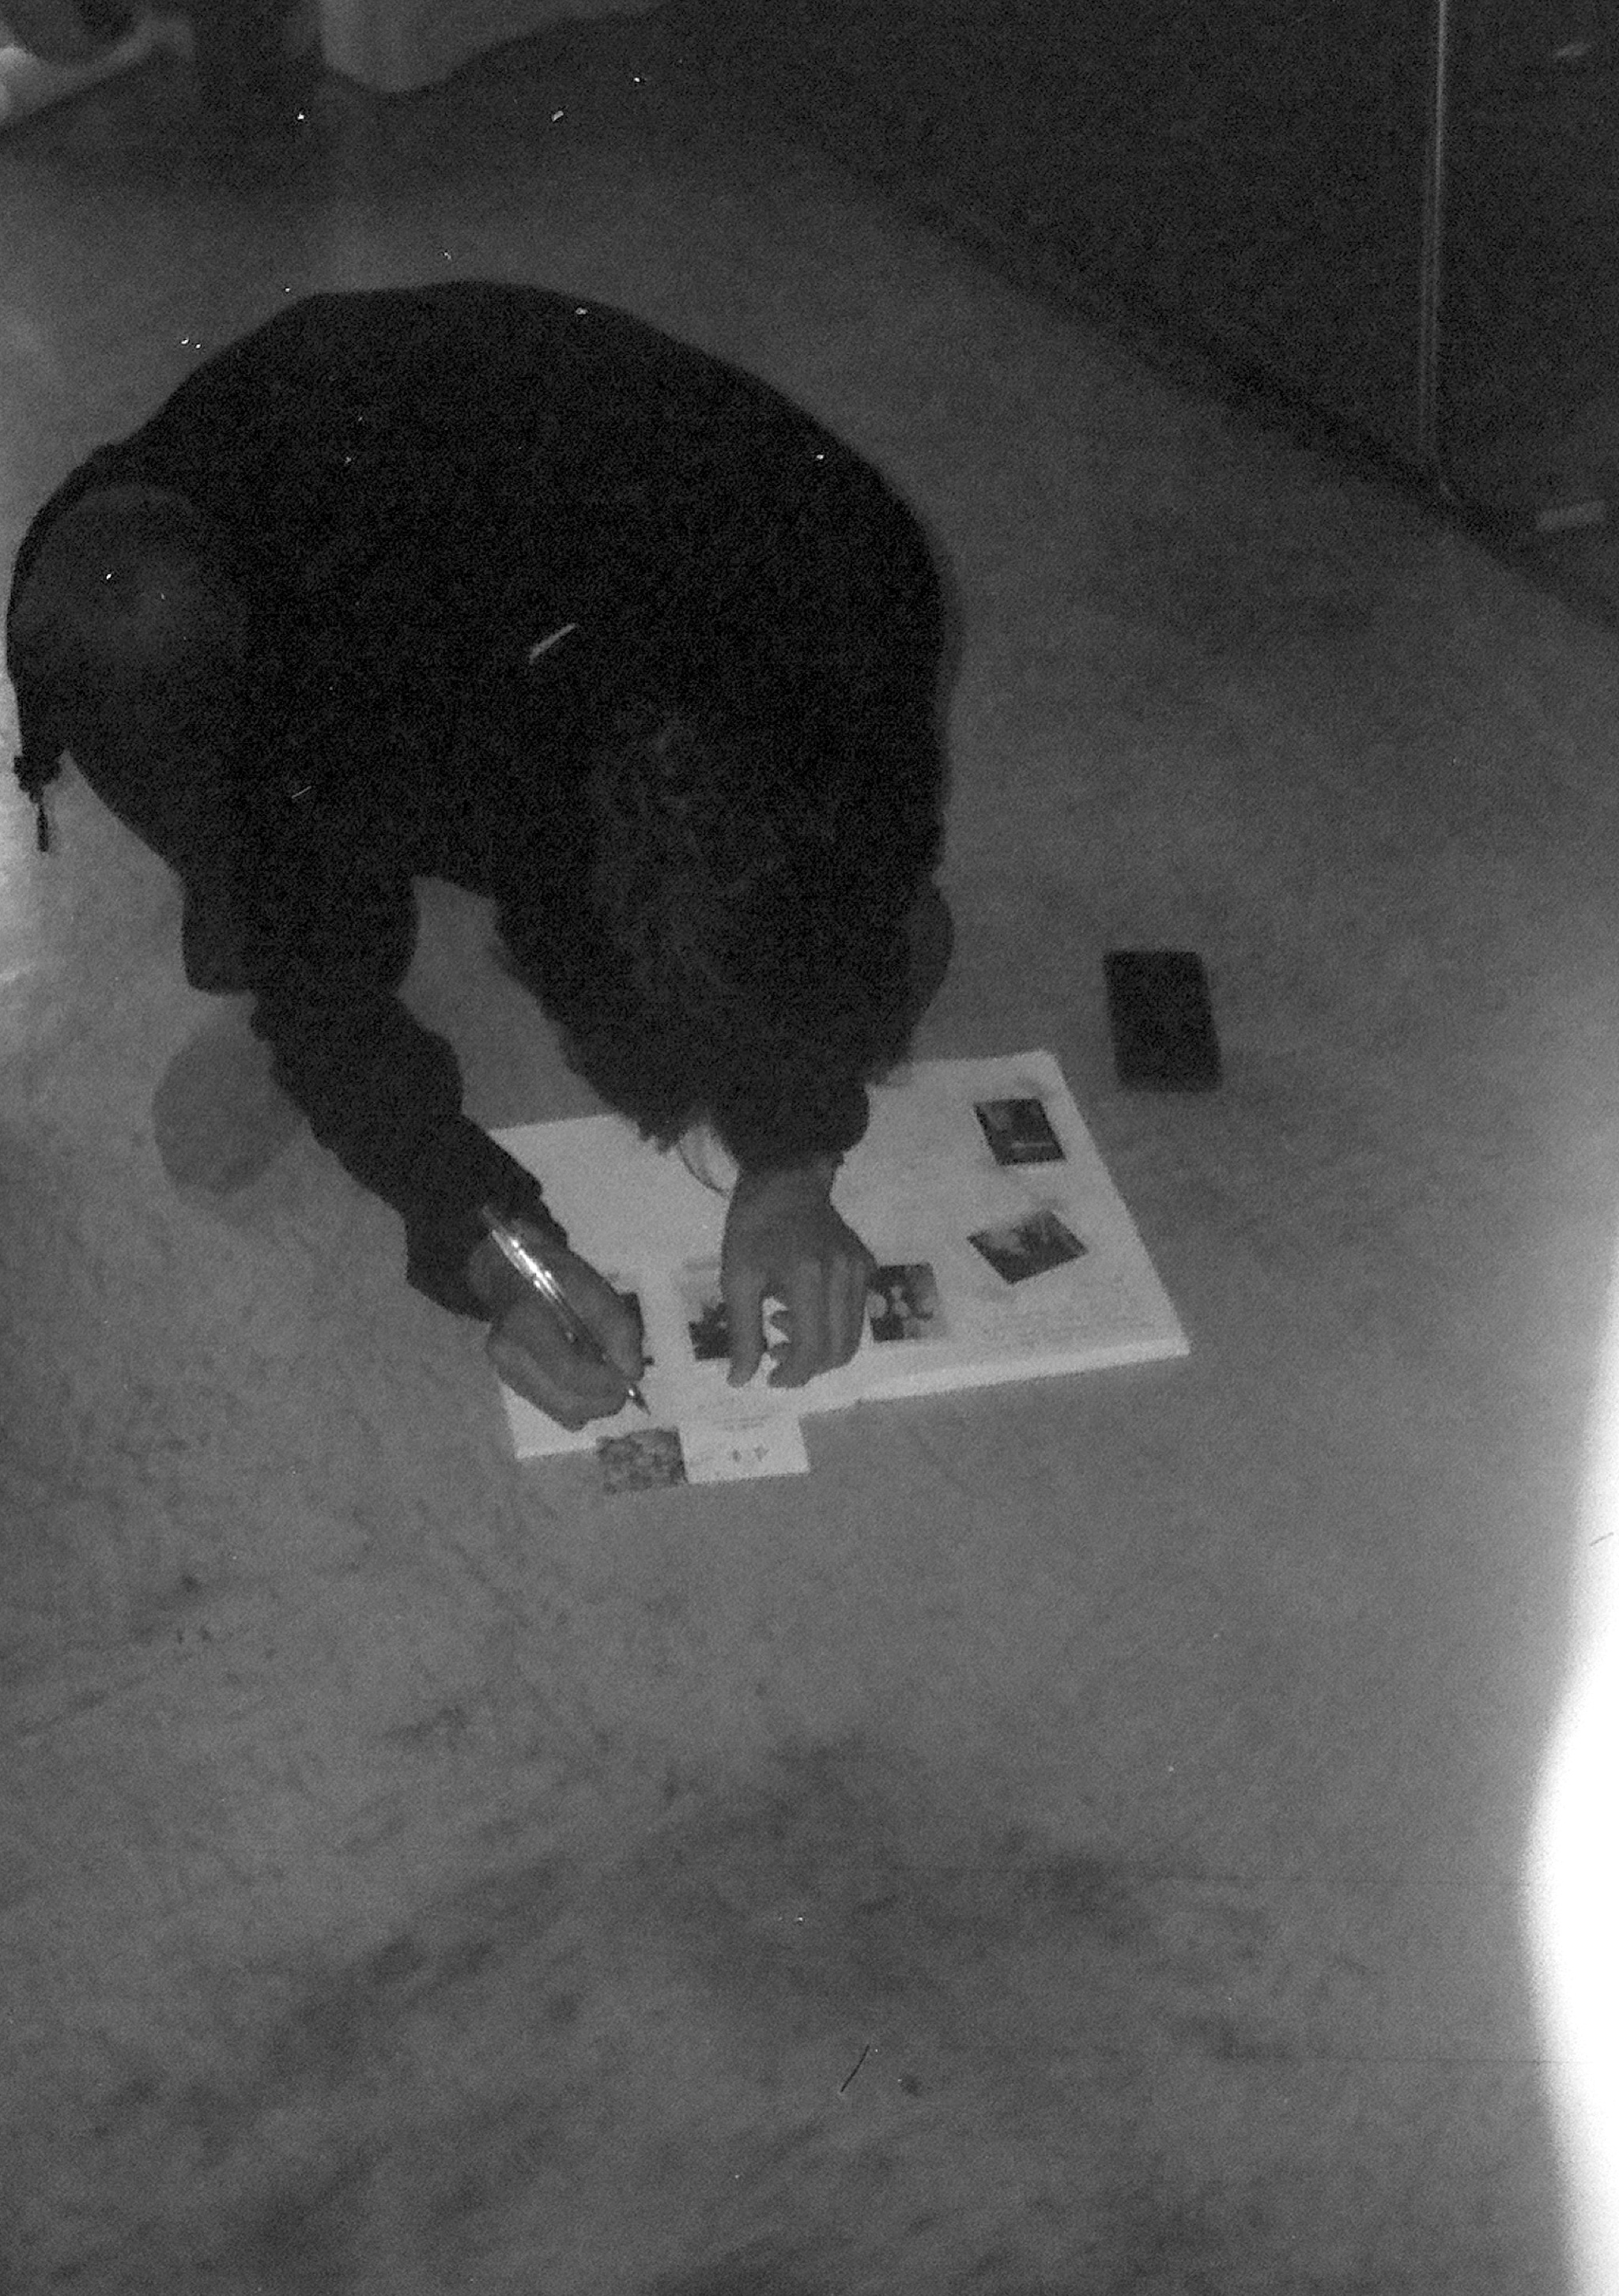 Man squatting down and writing on a book on the floor.